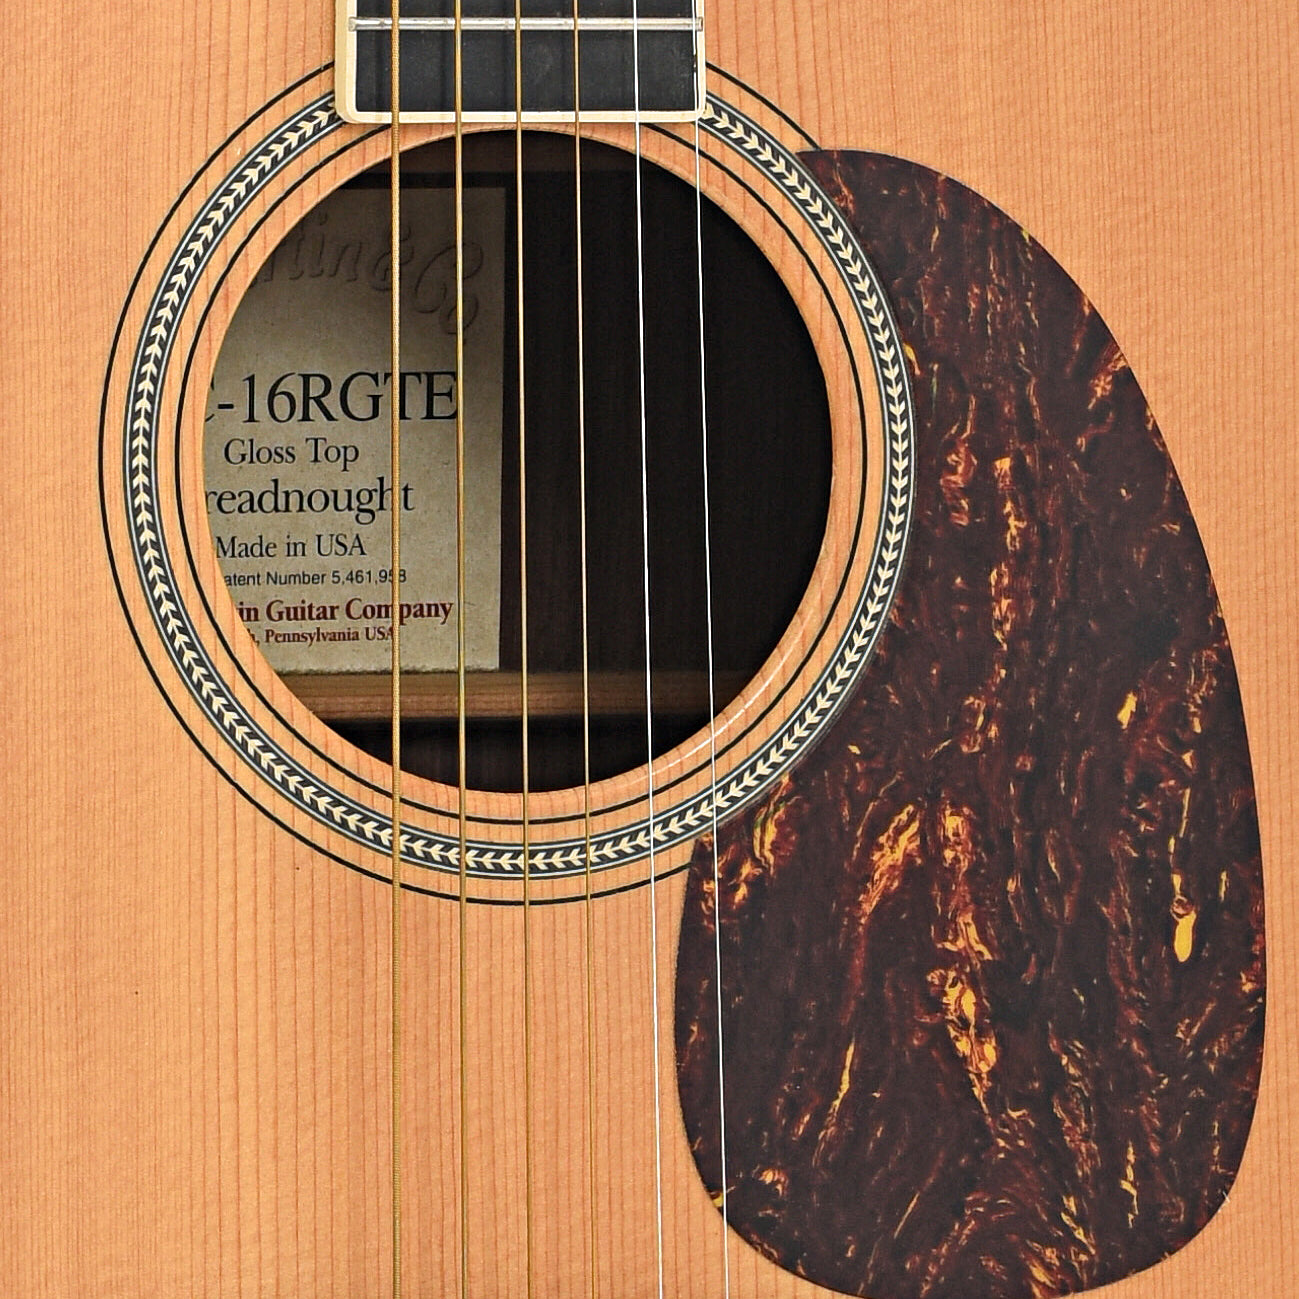 Soundhole and pickguard of Martin DC-16RGTE 